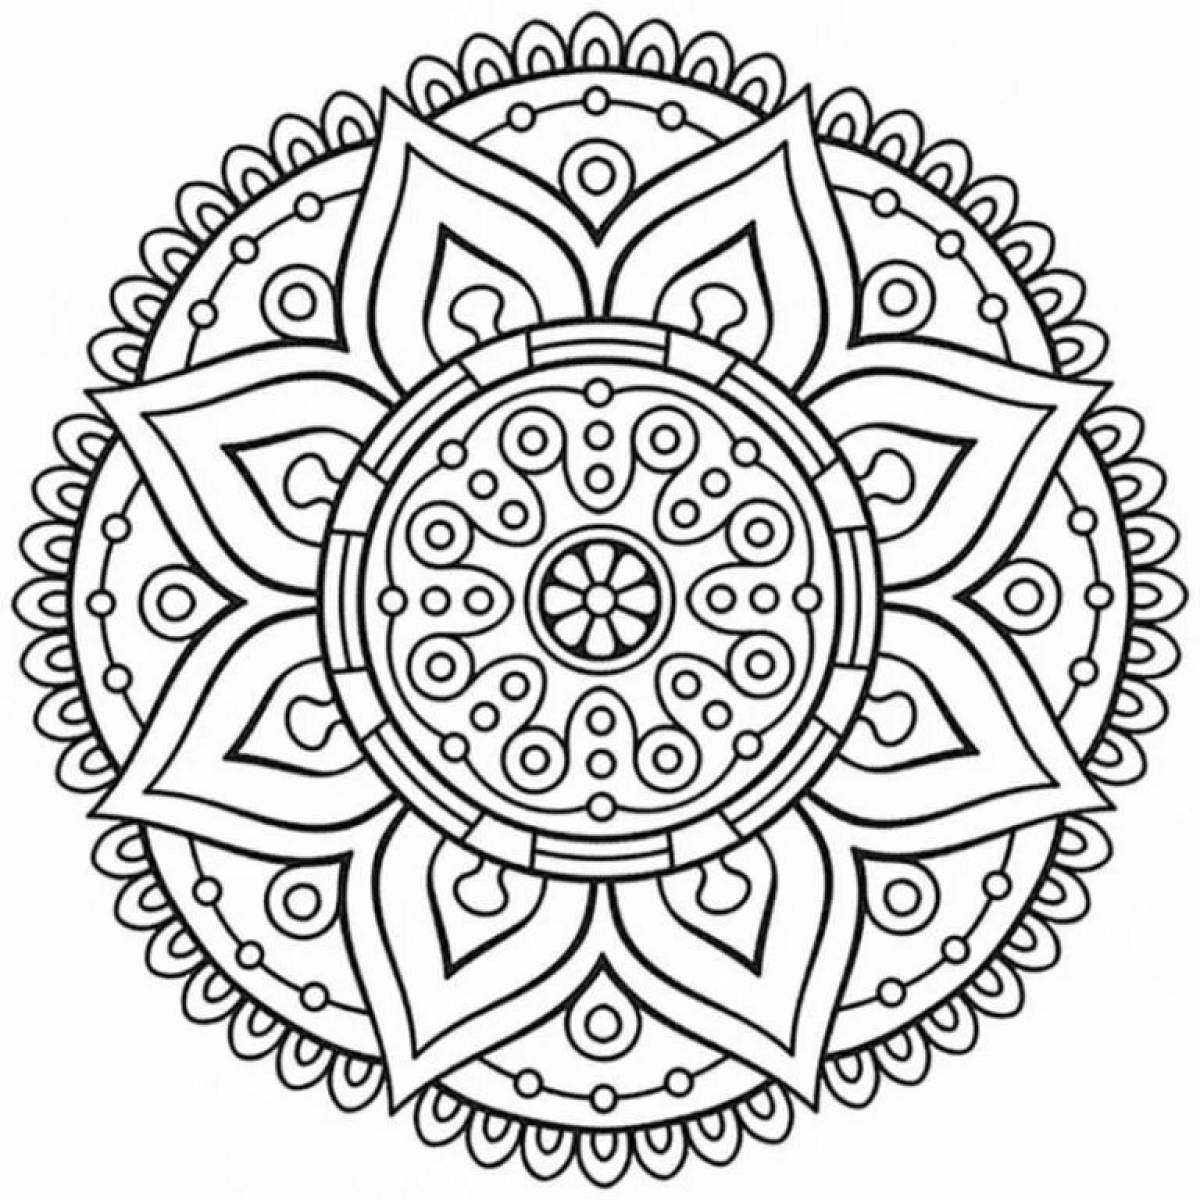 Fat mantra coloring page